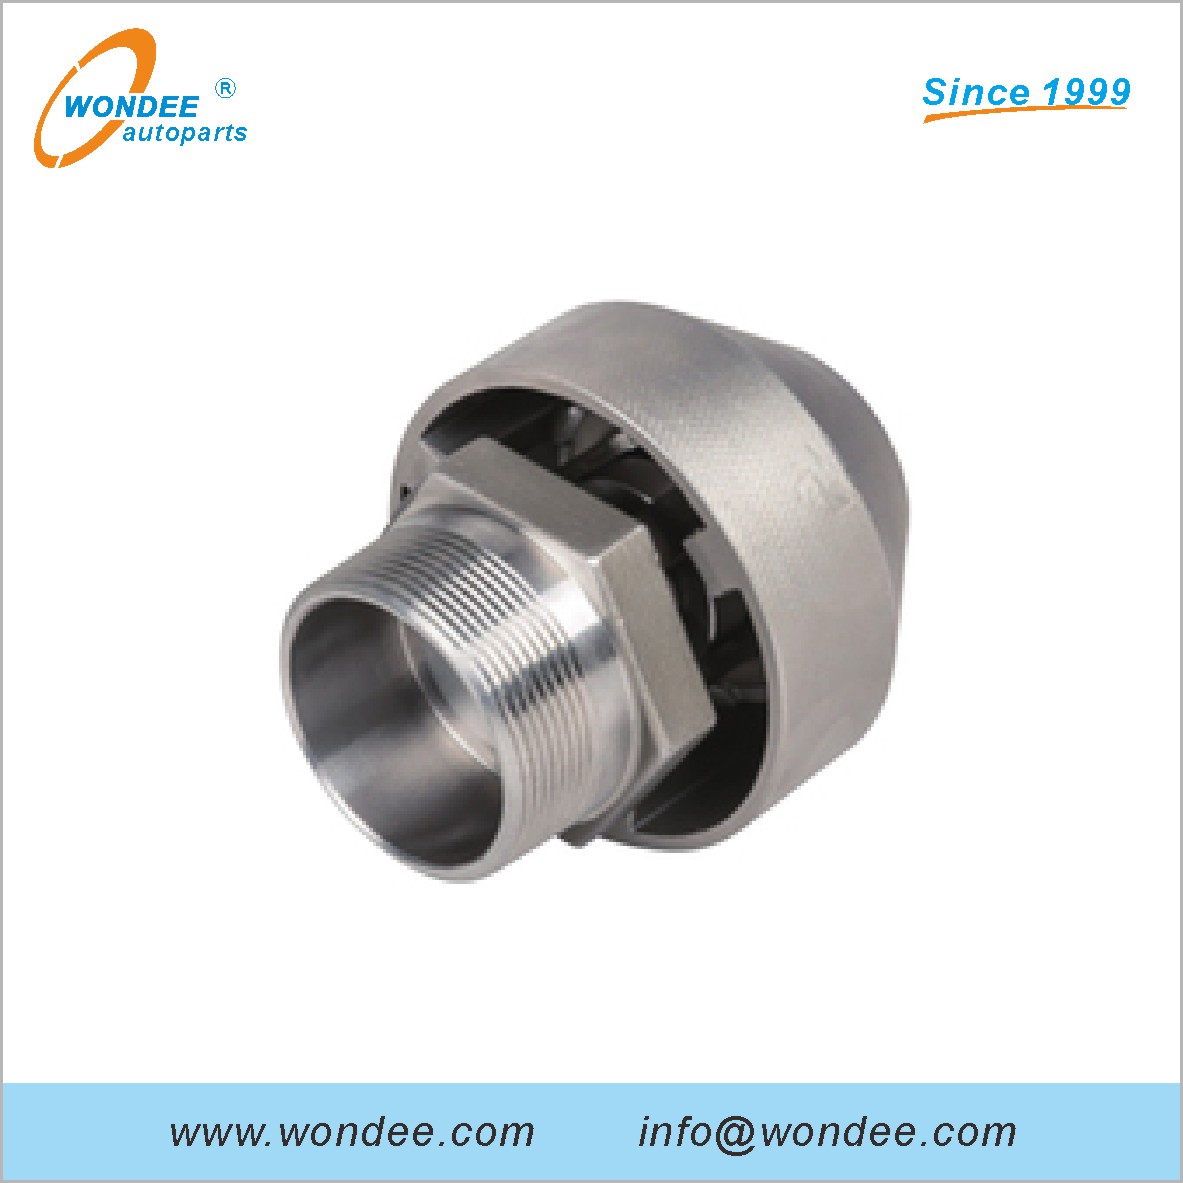 Flange Type and Clamp Type Manhole Cover Breathing Valve for Fuel Tanker Truck Parts